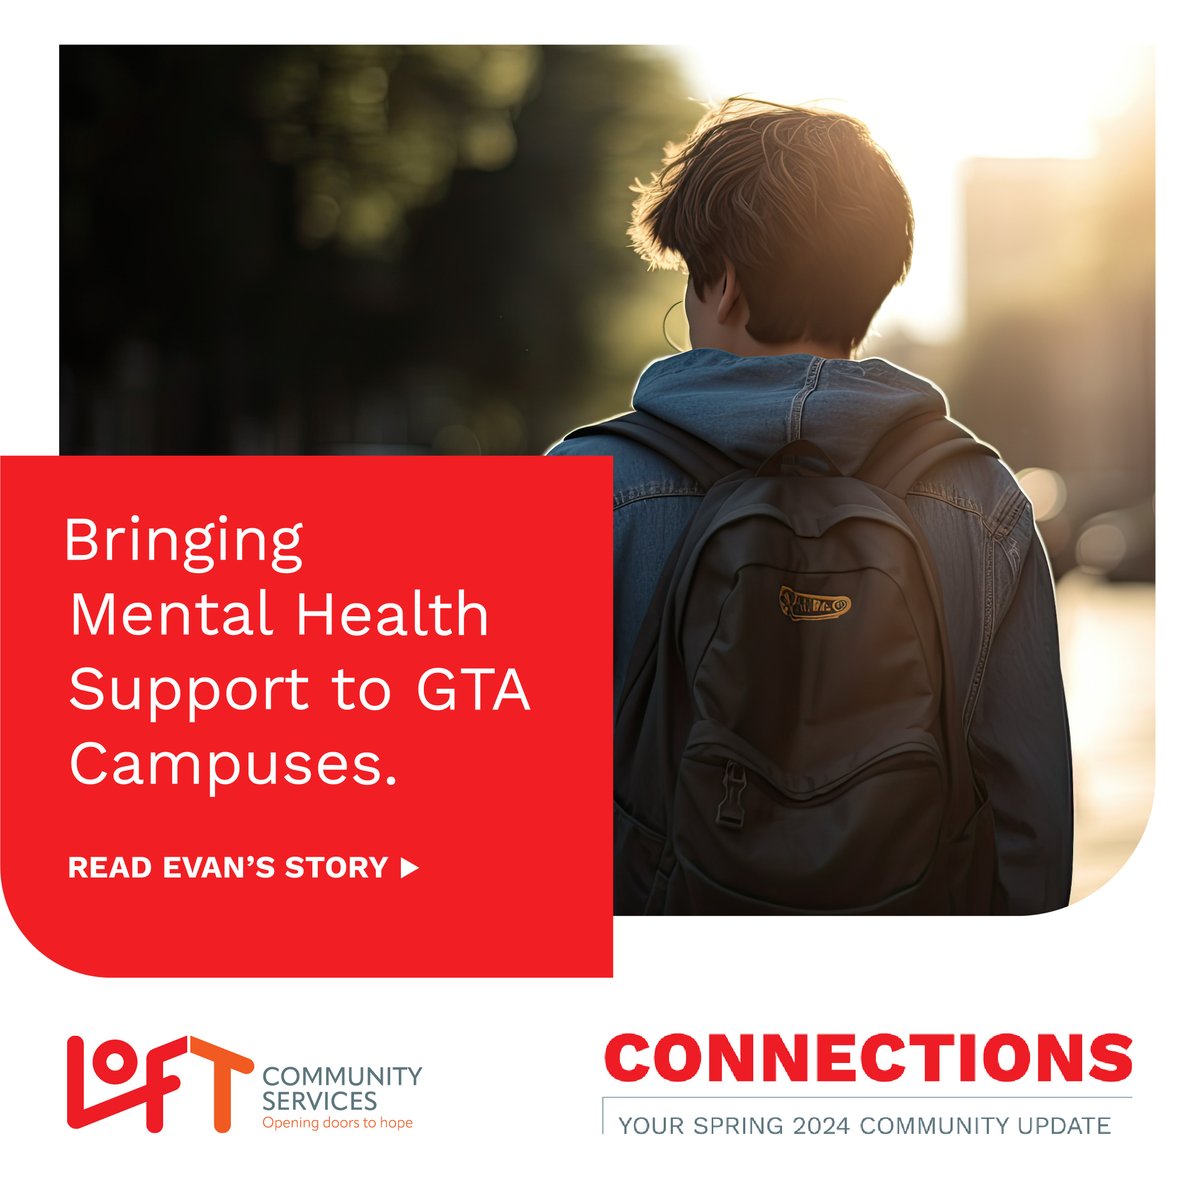 When Evan joined LOFT’s Campus Mental Health Program, this marked a turning point in his journey to mental wellness. Read Evan’s story at: ow.ly/5fB150R9Gsk. #YouthMentalHealth #CampusSupport #CommunitySupport #YouthEmpowerment #InspiringChange